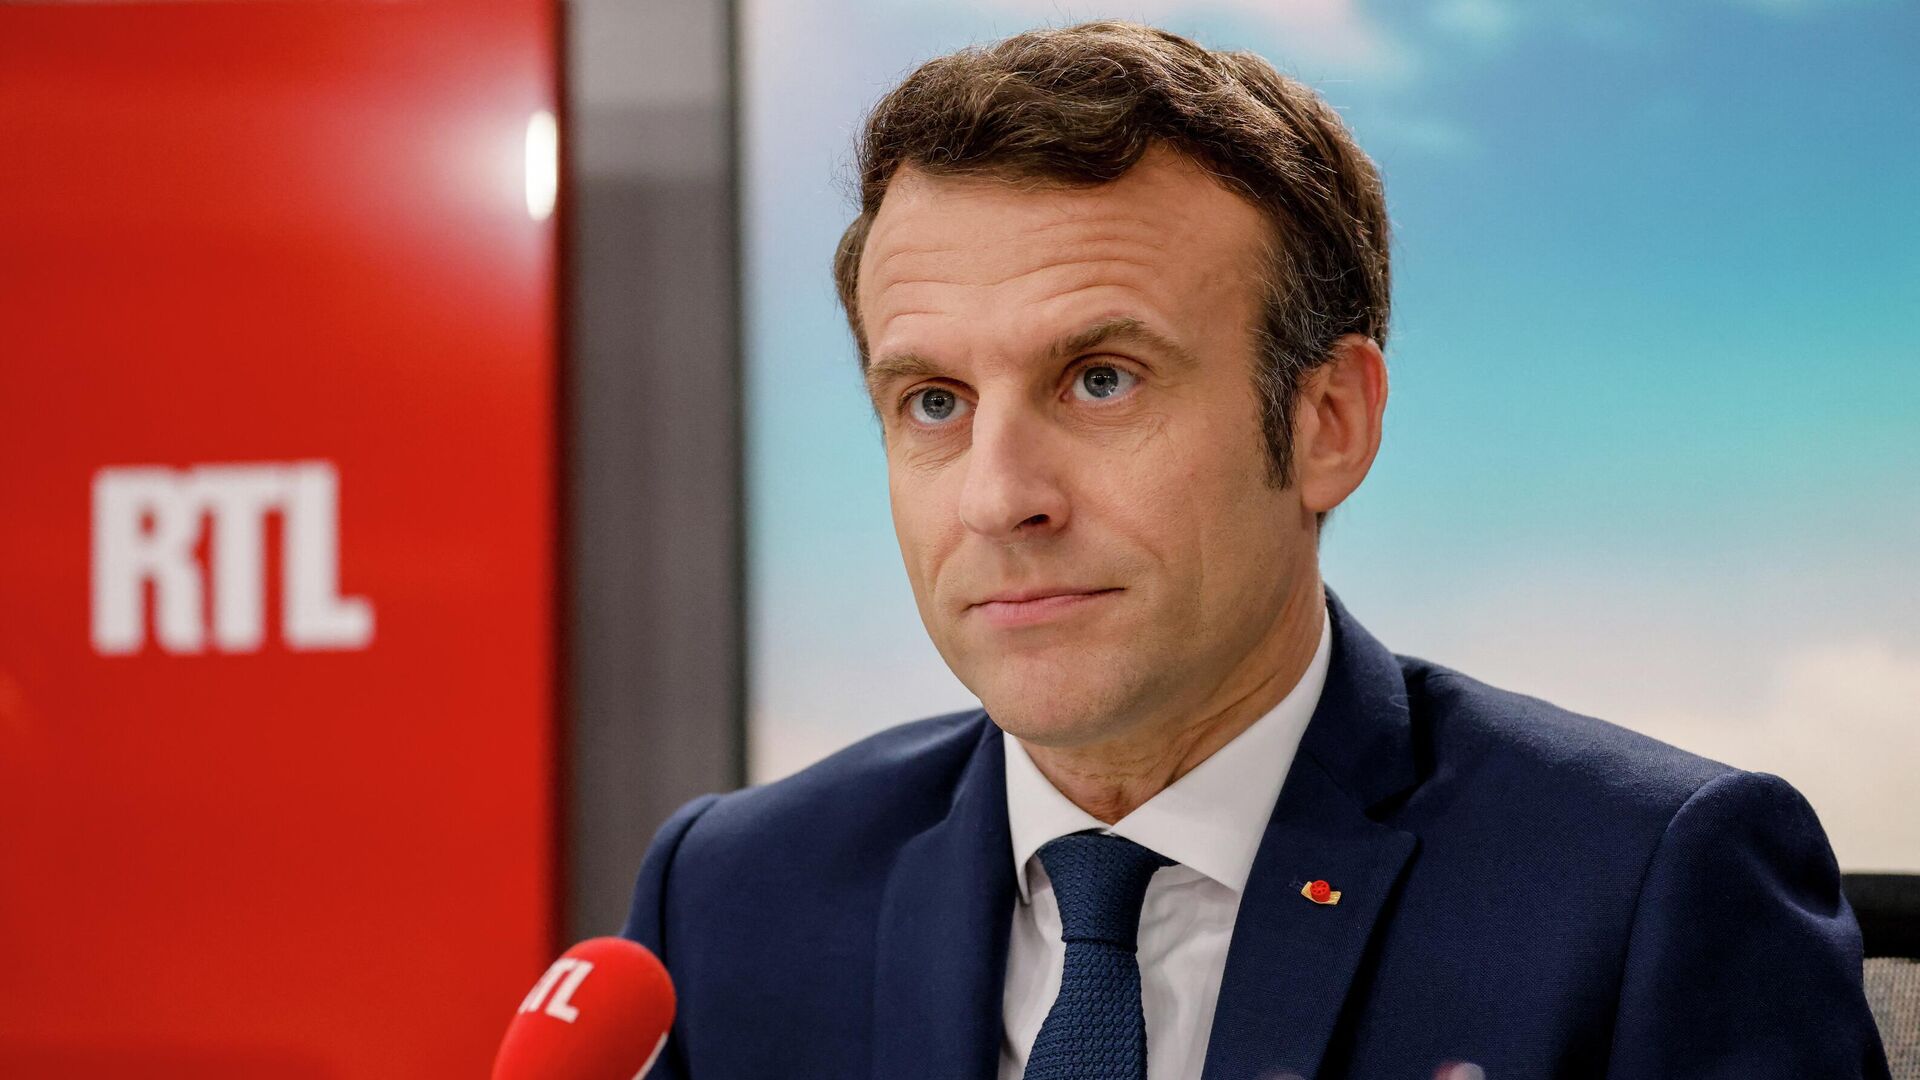 French President and liberal party La Republique en Marche (LREM) candidate for re-election Emmanuel Macron poses before a live interview on the set of French private radio station RTL in Neuilly-sur-Seine on April 8, 2022, as part of his political campaign two days before the first round of the French presidential election. - Sputnik International, 1920, 14.06.2022